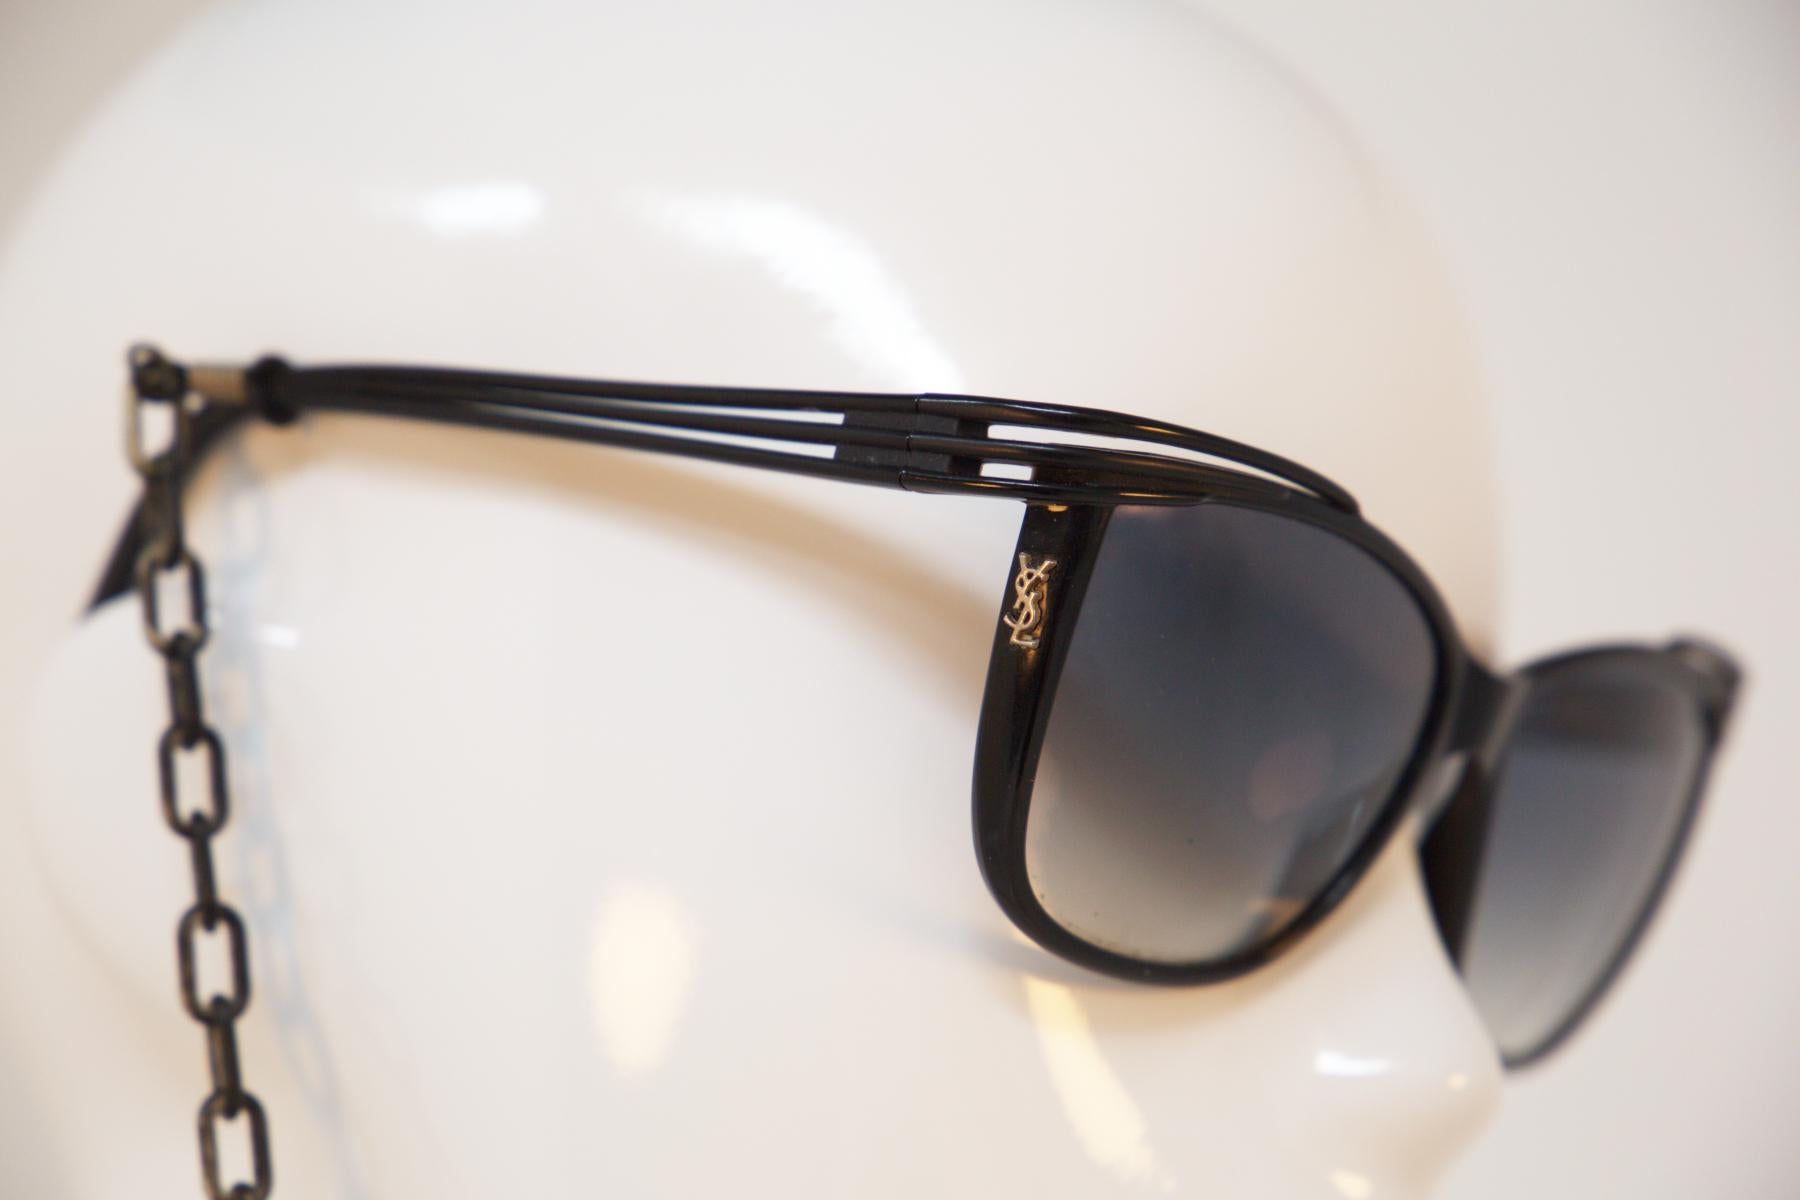 Stylish sunglasses designed by the world-famous Yves Saint Laurent in the 1980s, fine Italian manufacture.
Original logo on the side of the glasses.
The glasses have an elegant cut, the lenses are slightly elongated, with a very simple black